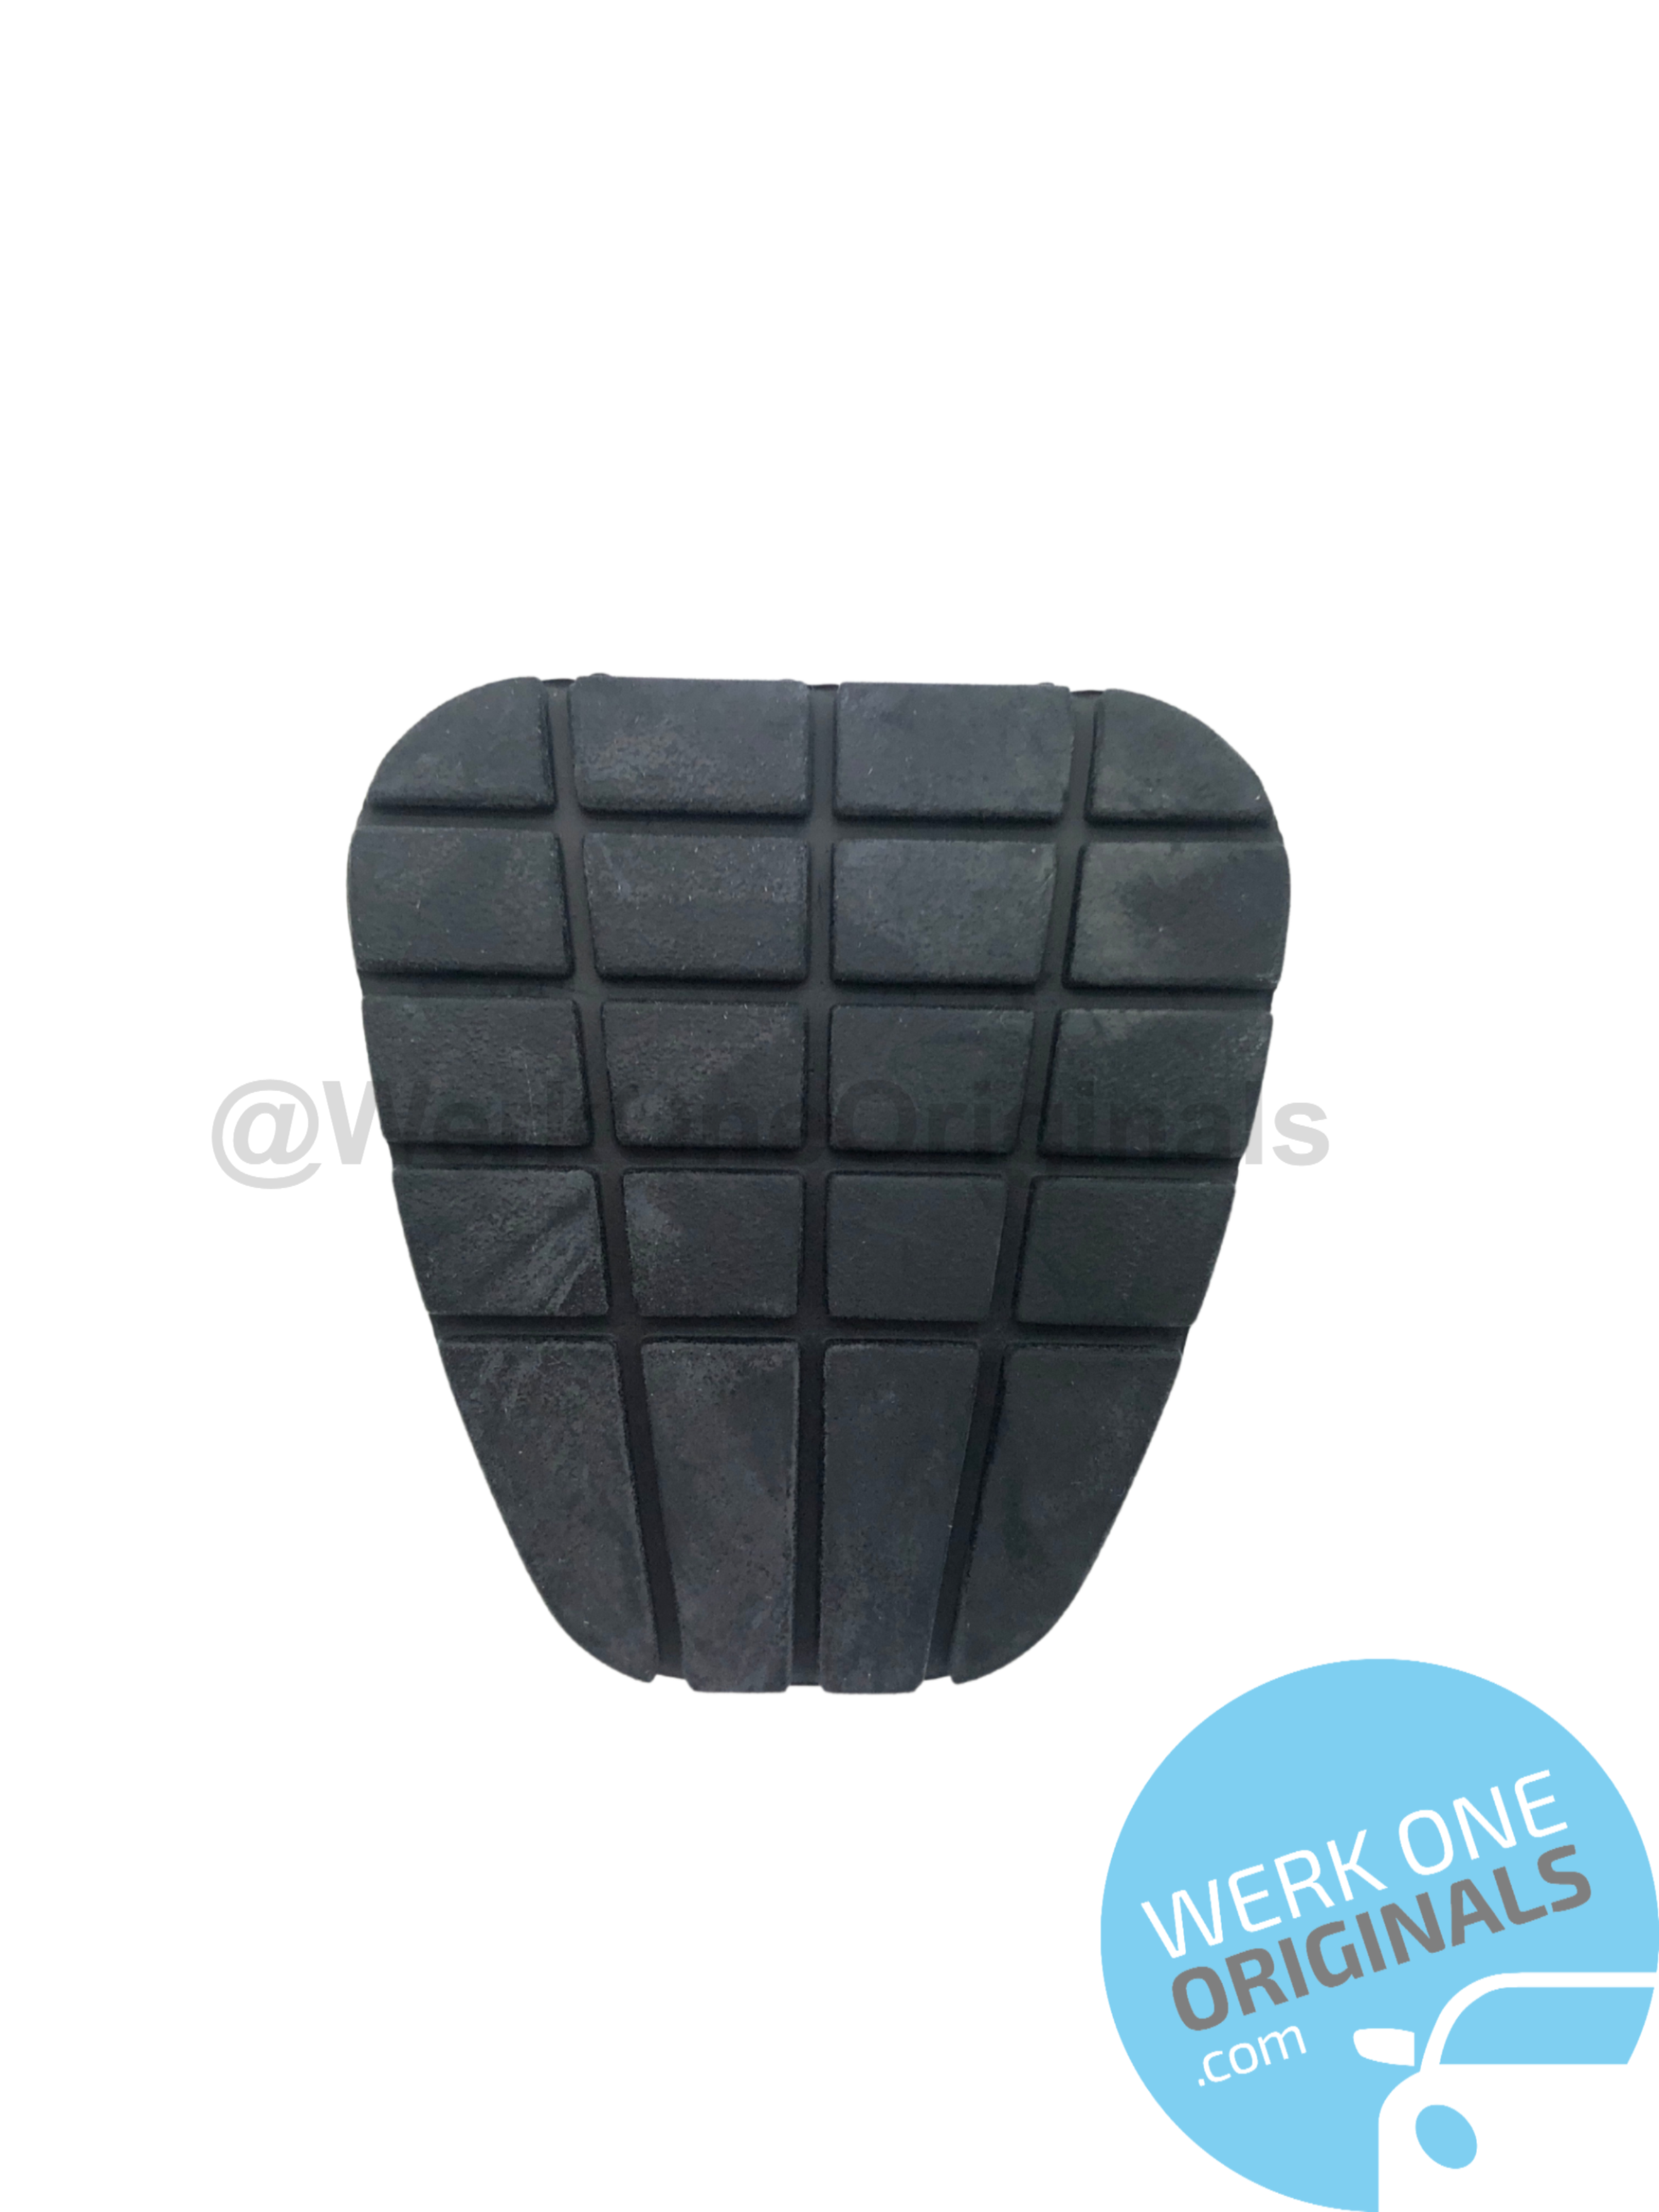 Porsche Footrest Replacement with Brake & Clutch Pedal Caps for 911 Type 996 Models